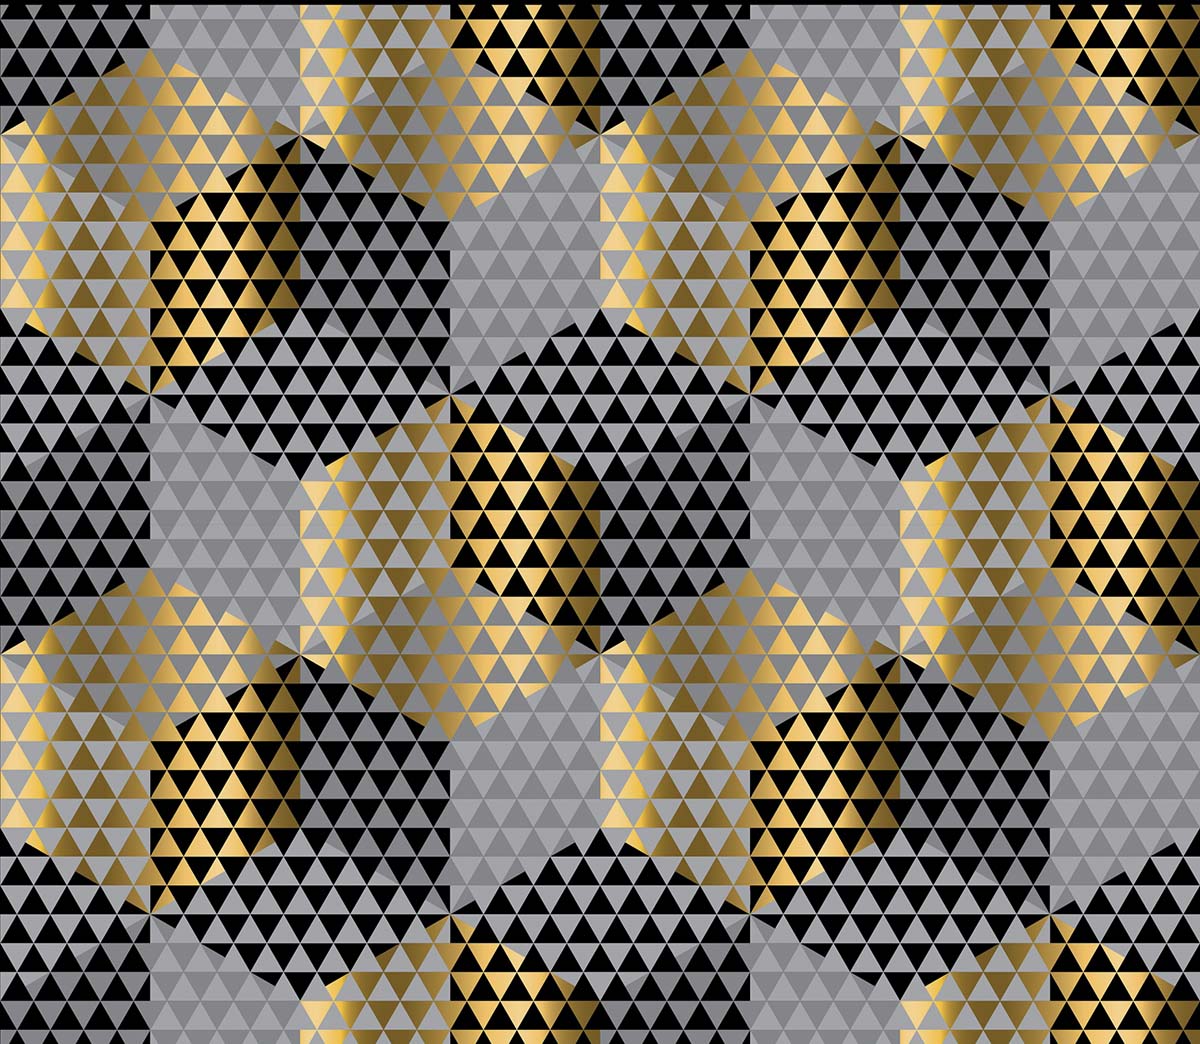 A pattern of black and gold triangles